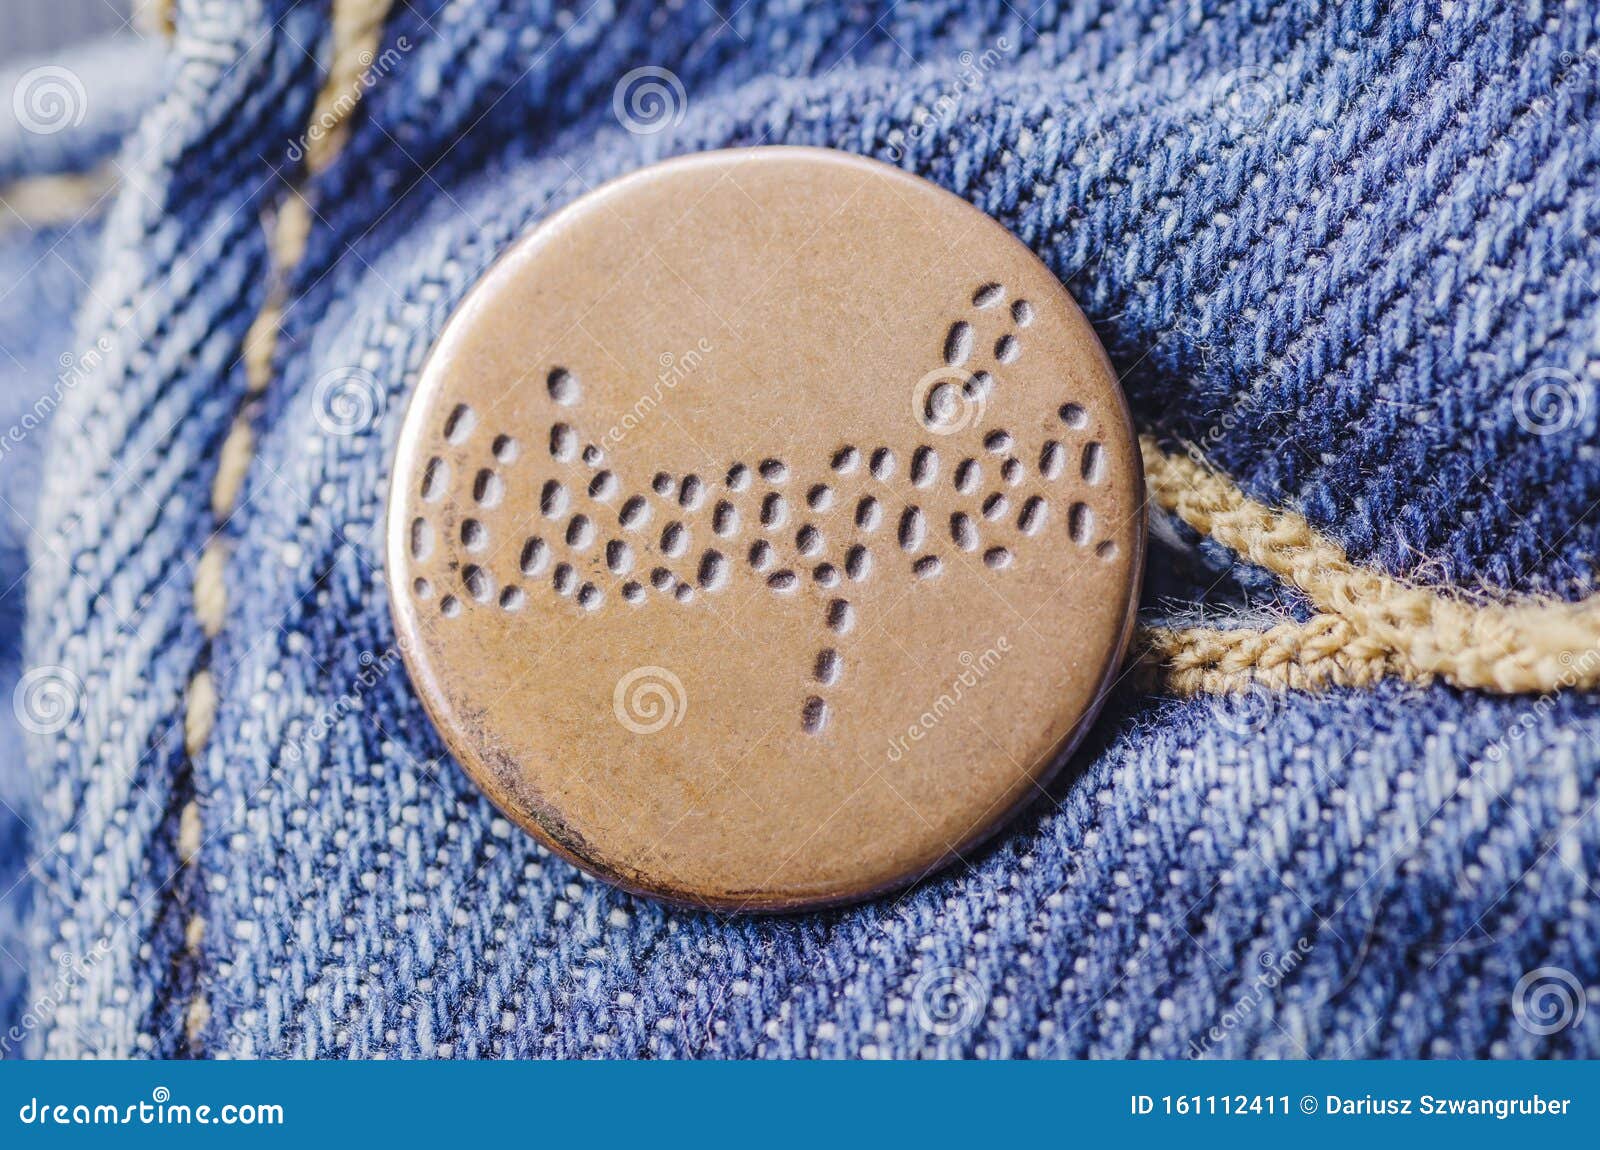 Closeup of Wrangler Button on Blue Jeans. Editorial Photo - Image of cloth,  illustrative: 161112411